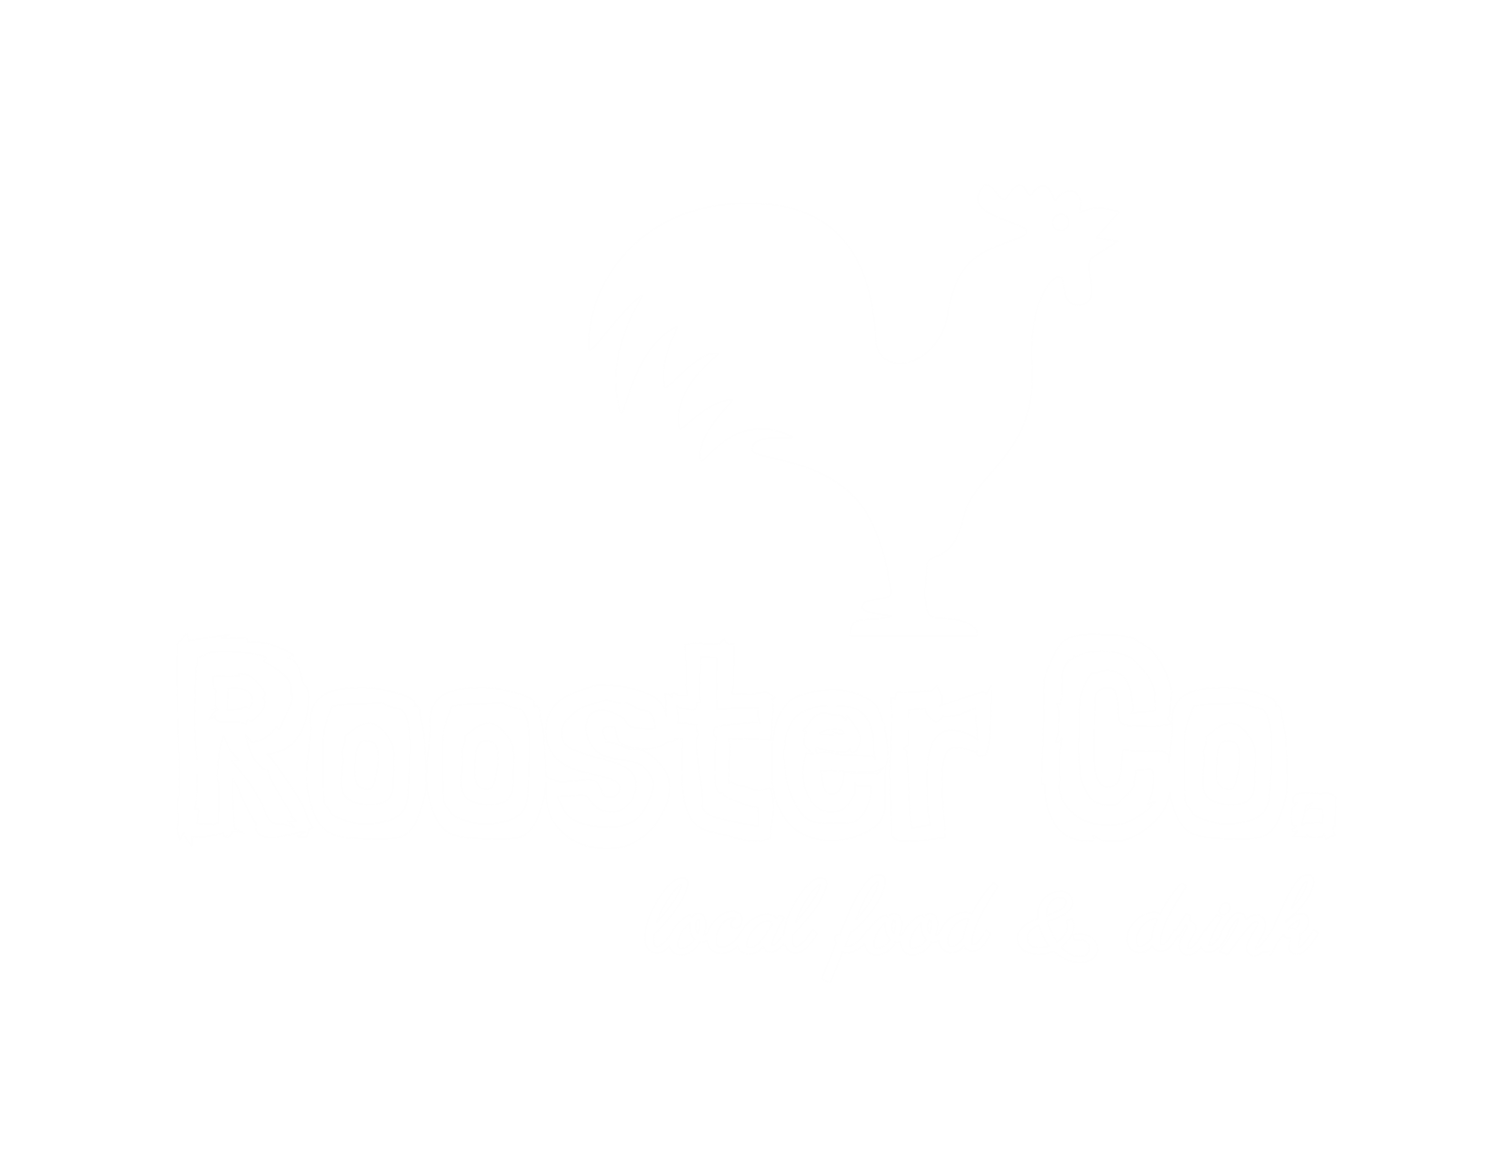 Black and White Rooster Logo - Rooster Co. Rooster Co.